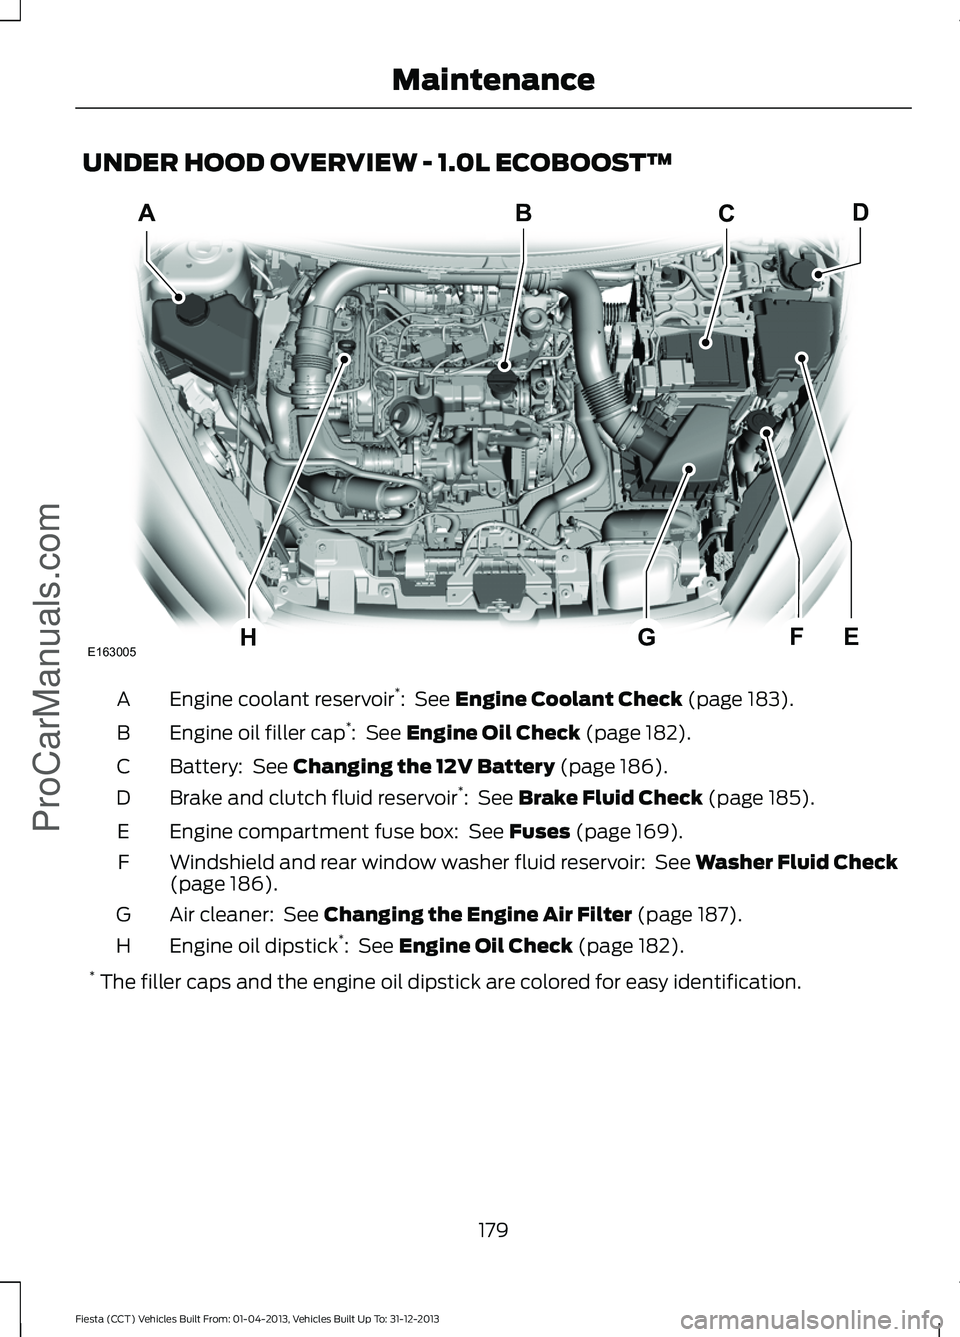 FORD FIESTA 2014  Owners Manual UNDER HOOD OVERVIEW - 1.0L ECOBOOST™
Engine coolant reservoir
*
:  See Engine Coolant Check (page 183).
A
Engine oil filler cap *
: 
 See Engine Oil Check (page 182).
B
Battery: 
 See Changing the 1